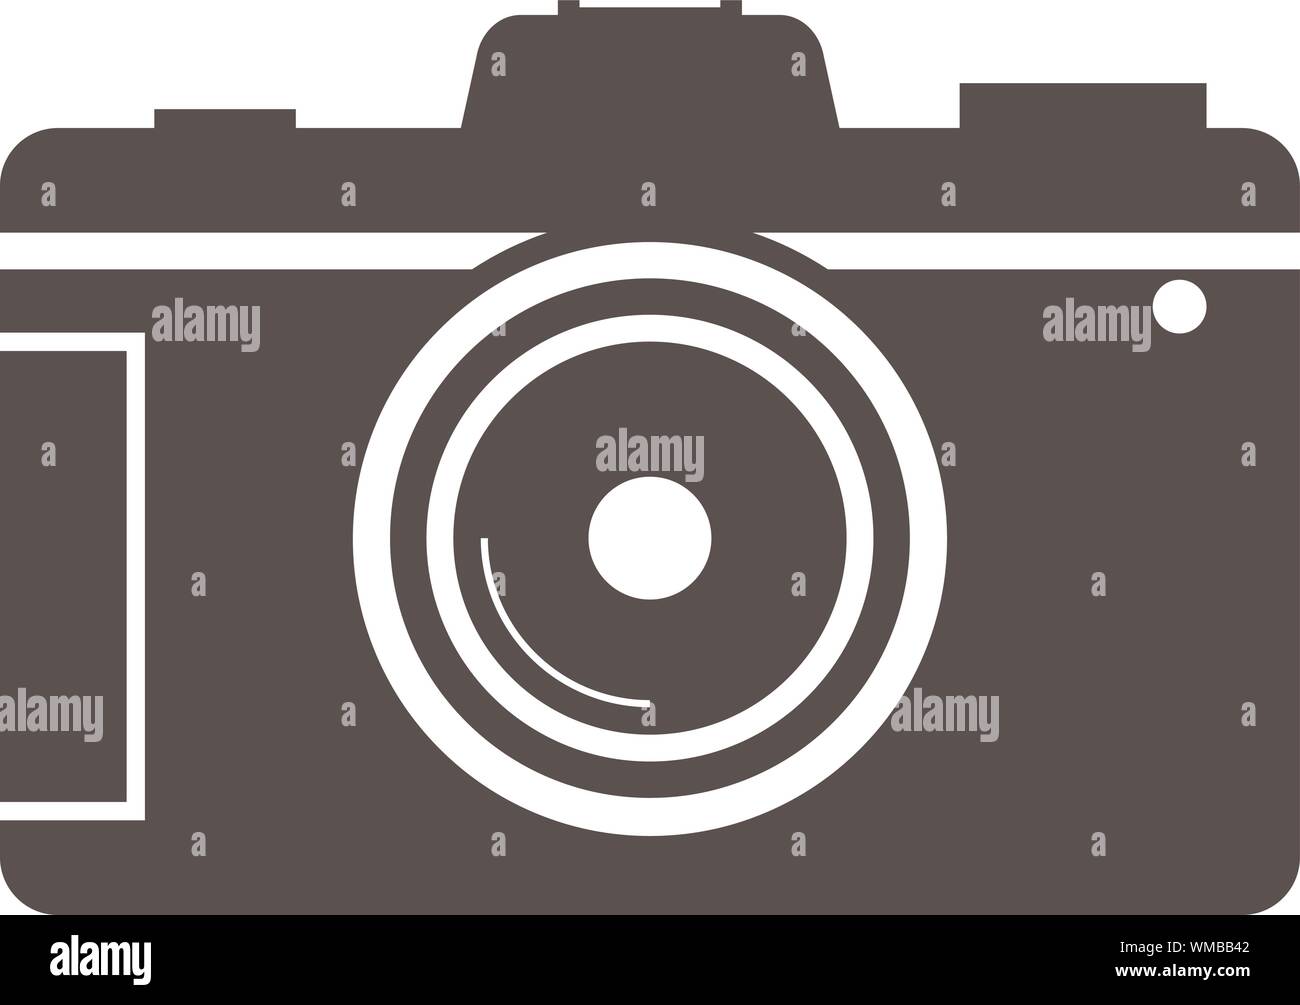 simple flat black and white dslr camera icon vector illustration Stock Vector